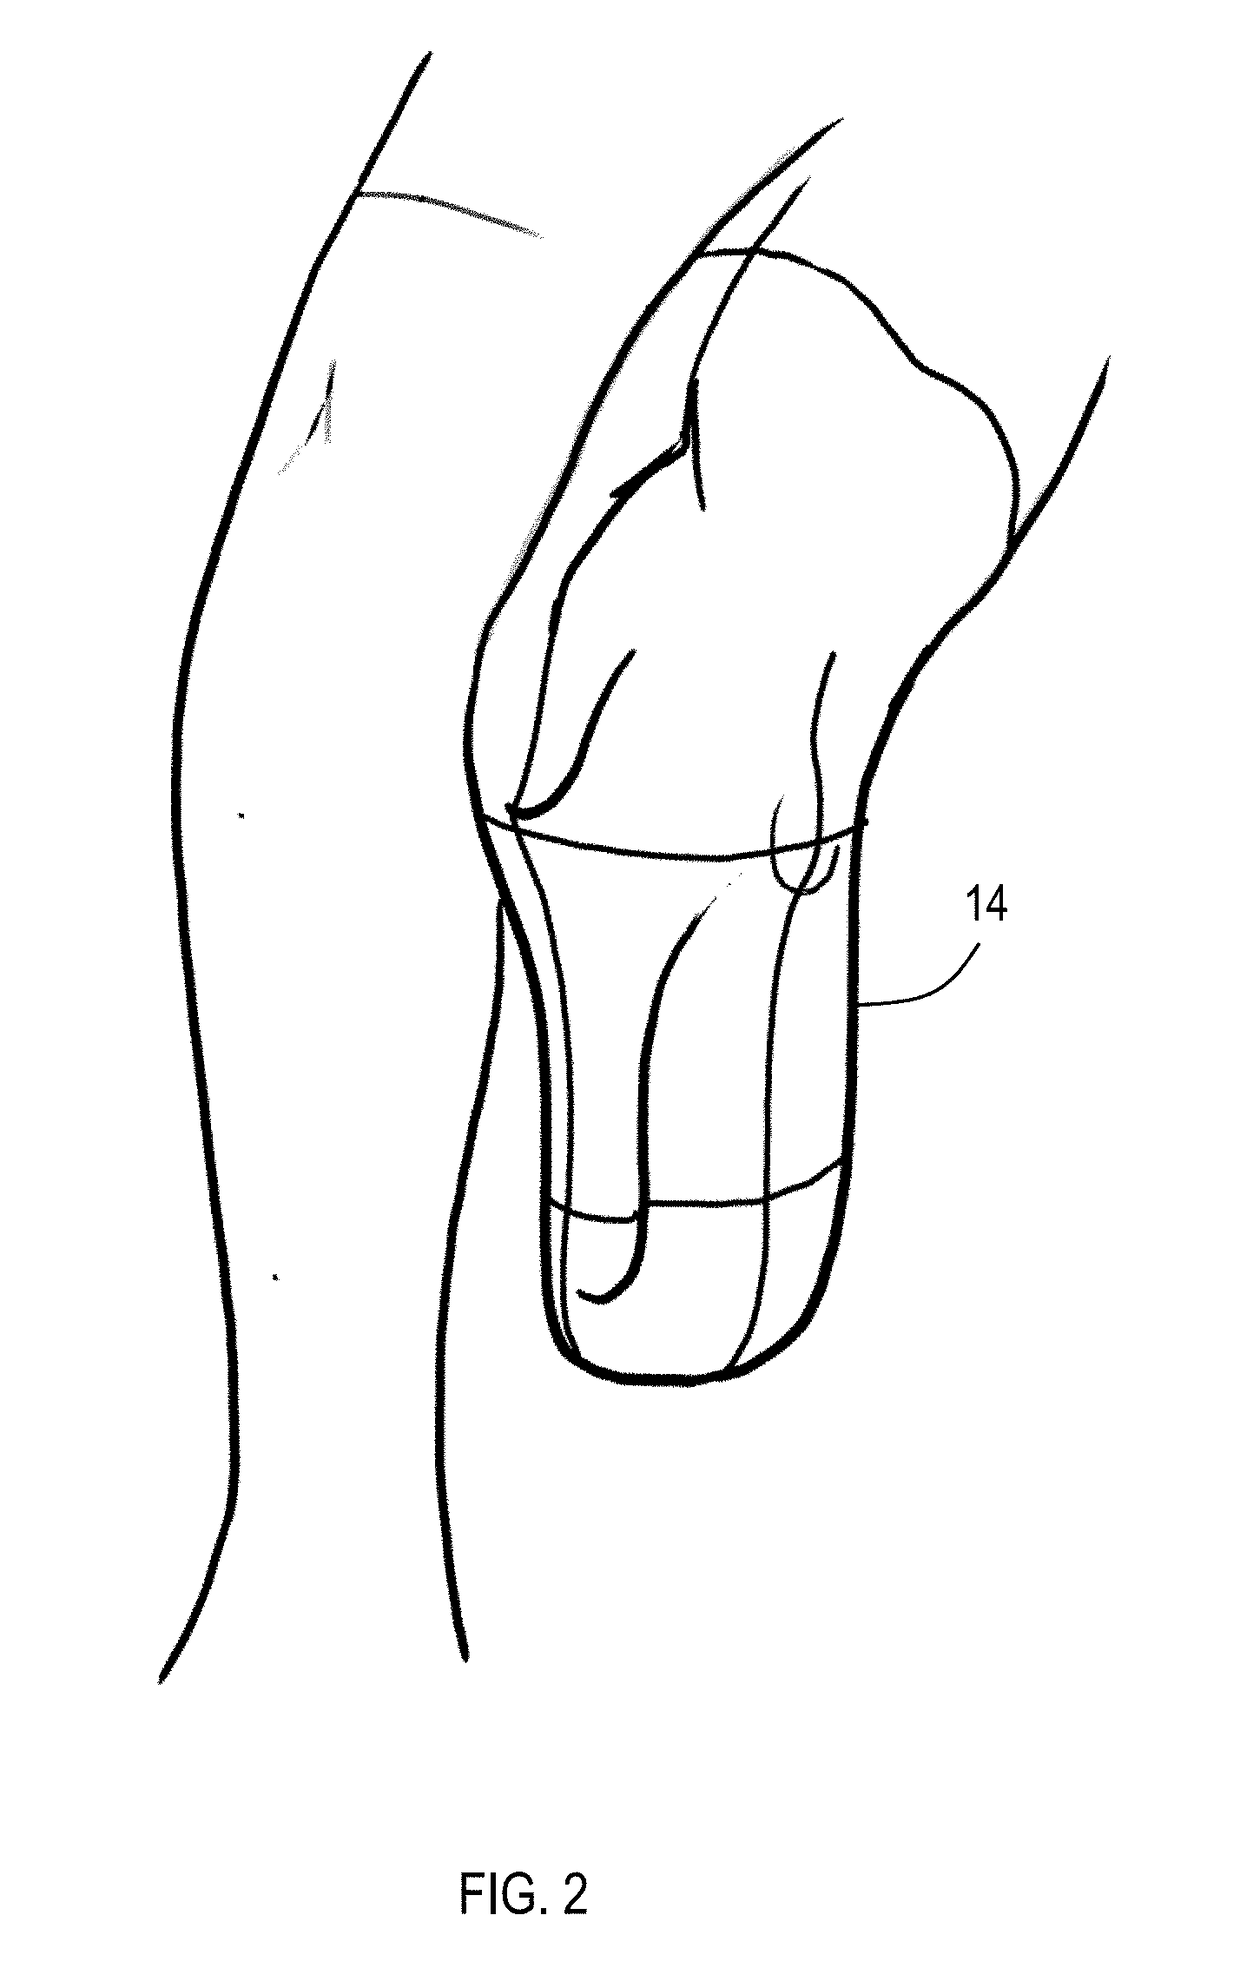 Prosthetic limb socket with variable harness